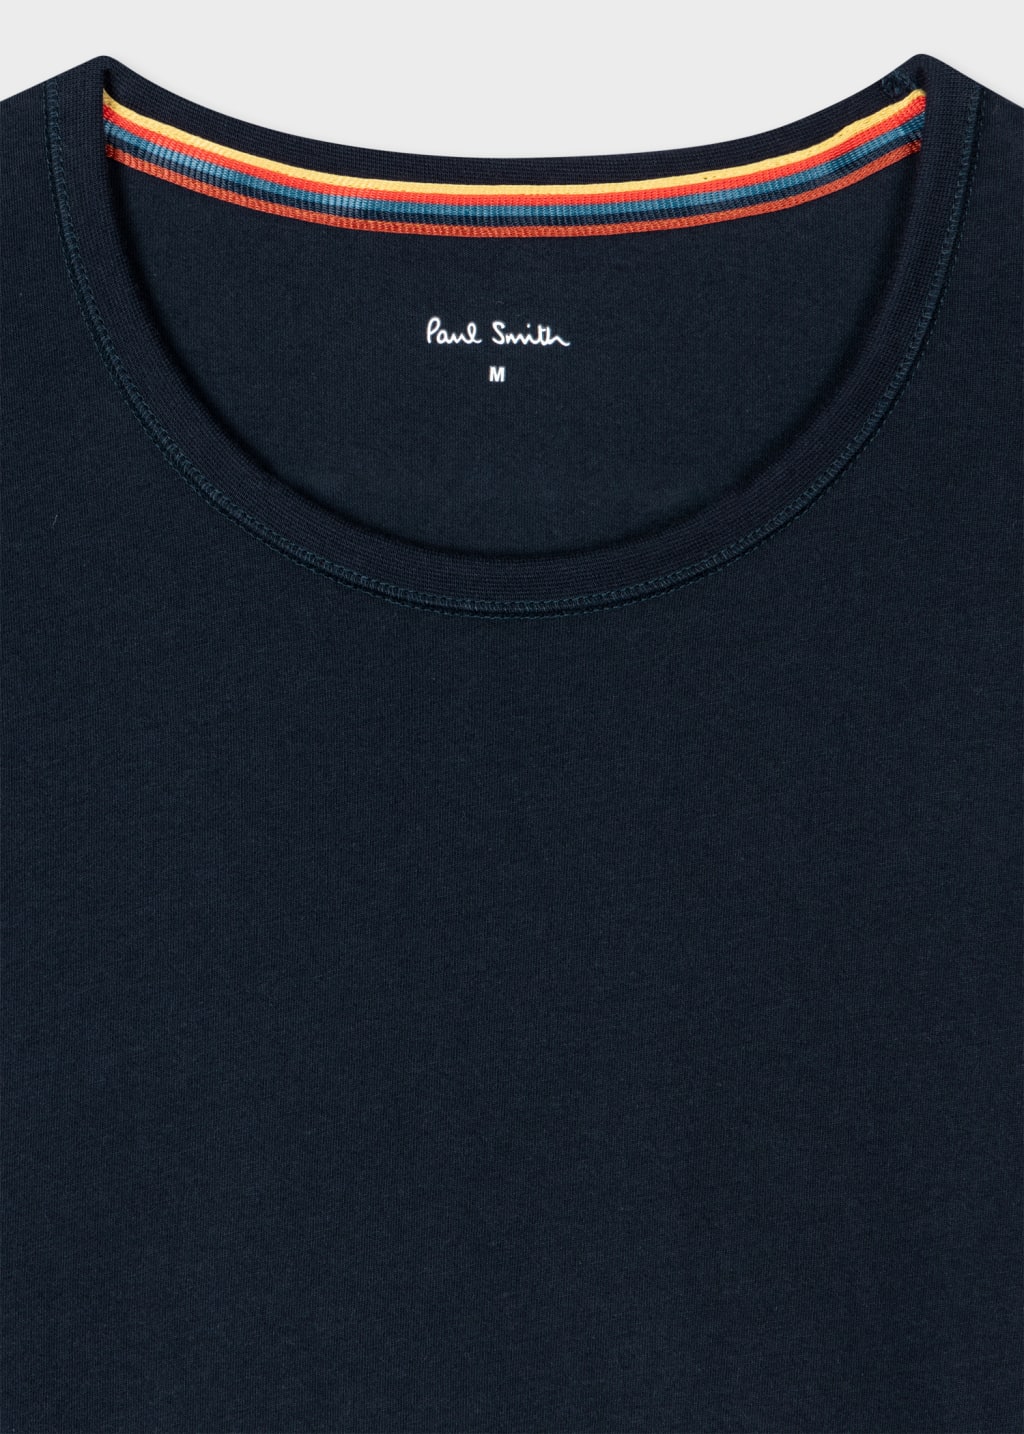 Model View - Men's Navy Cotton Lounge T-Shirt by Paul Smith